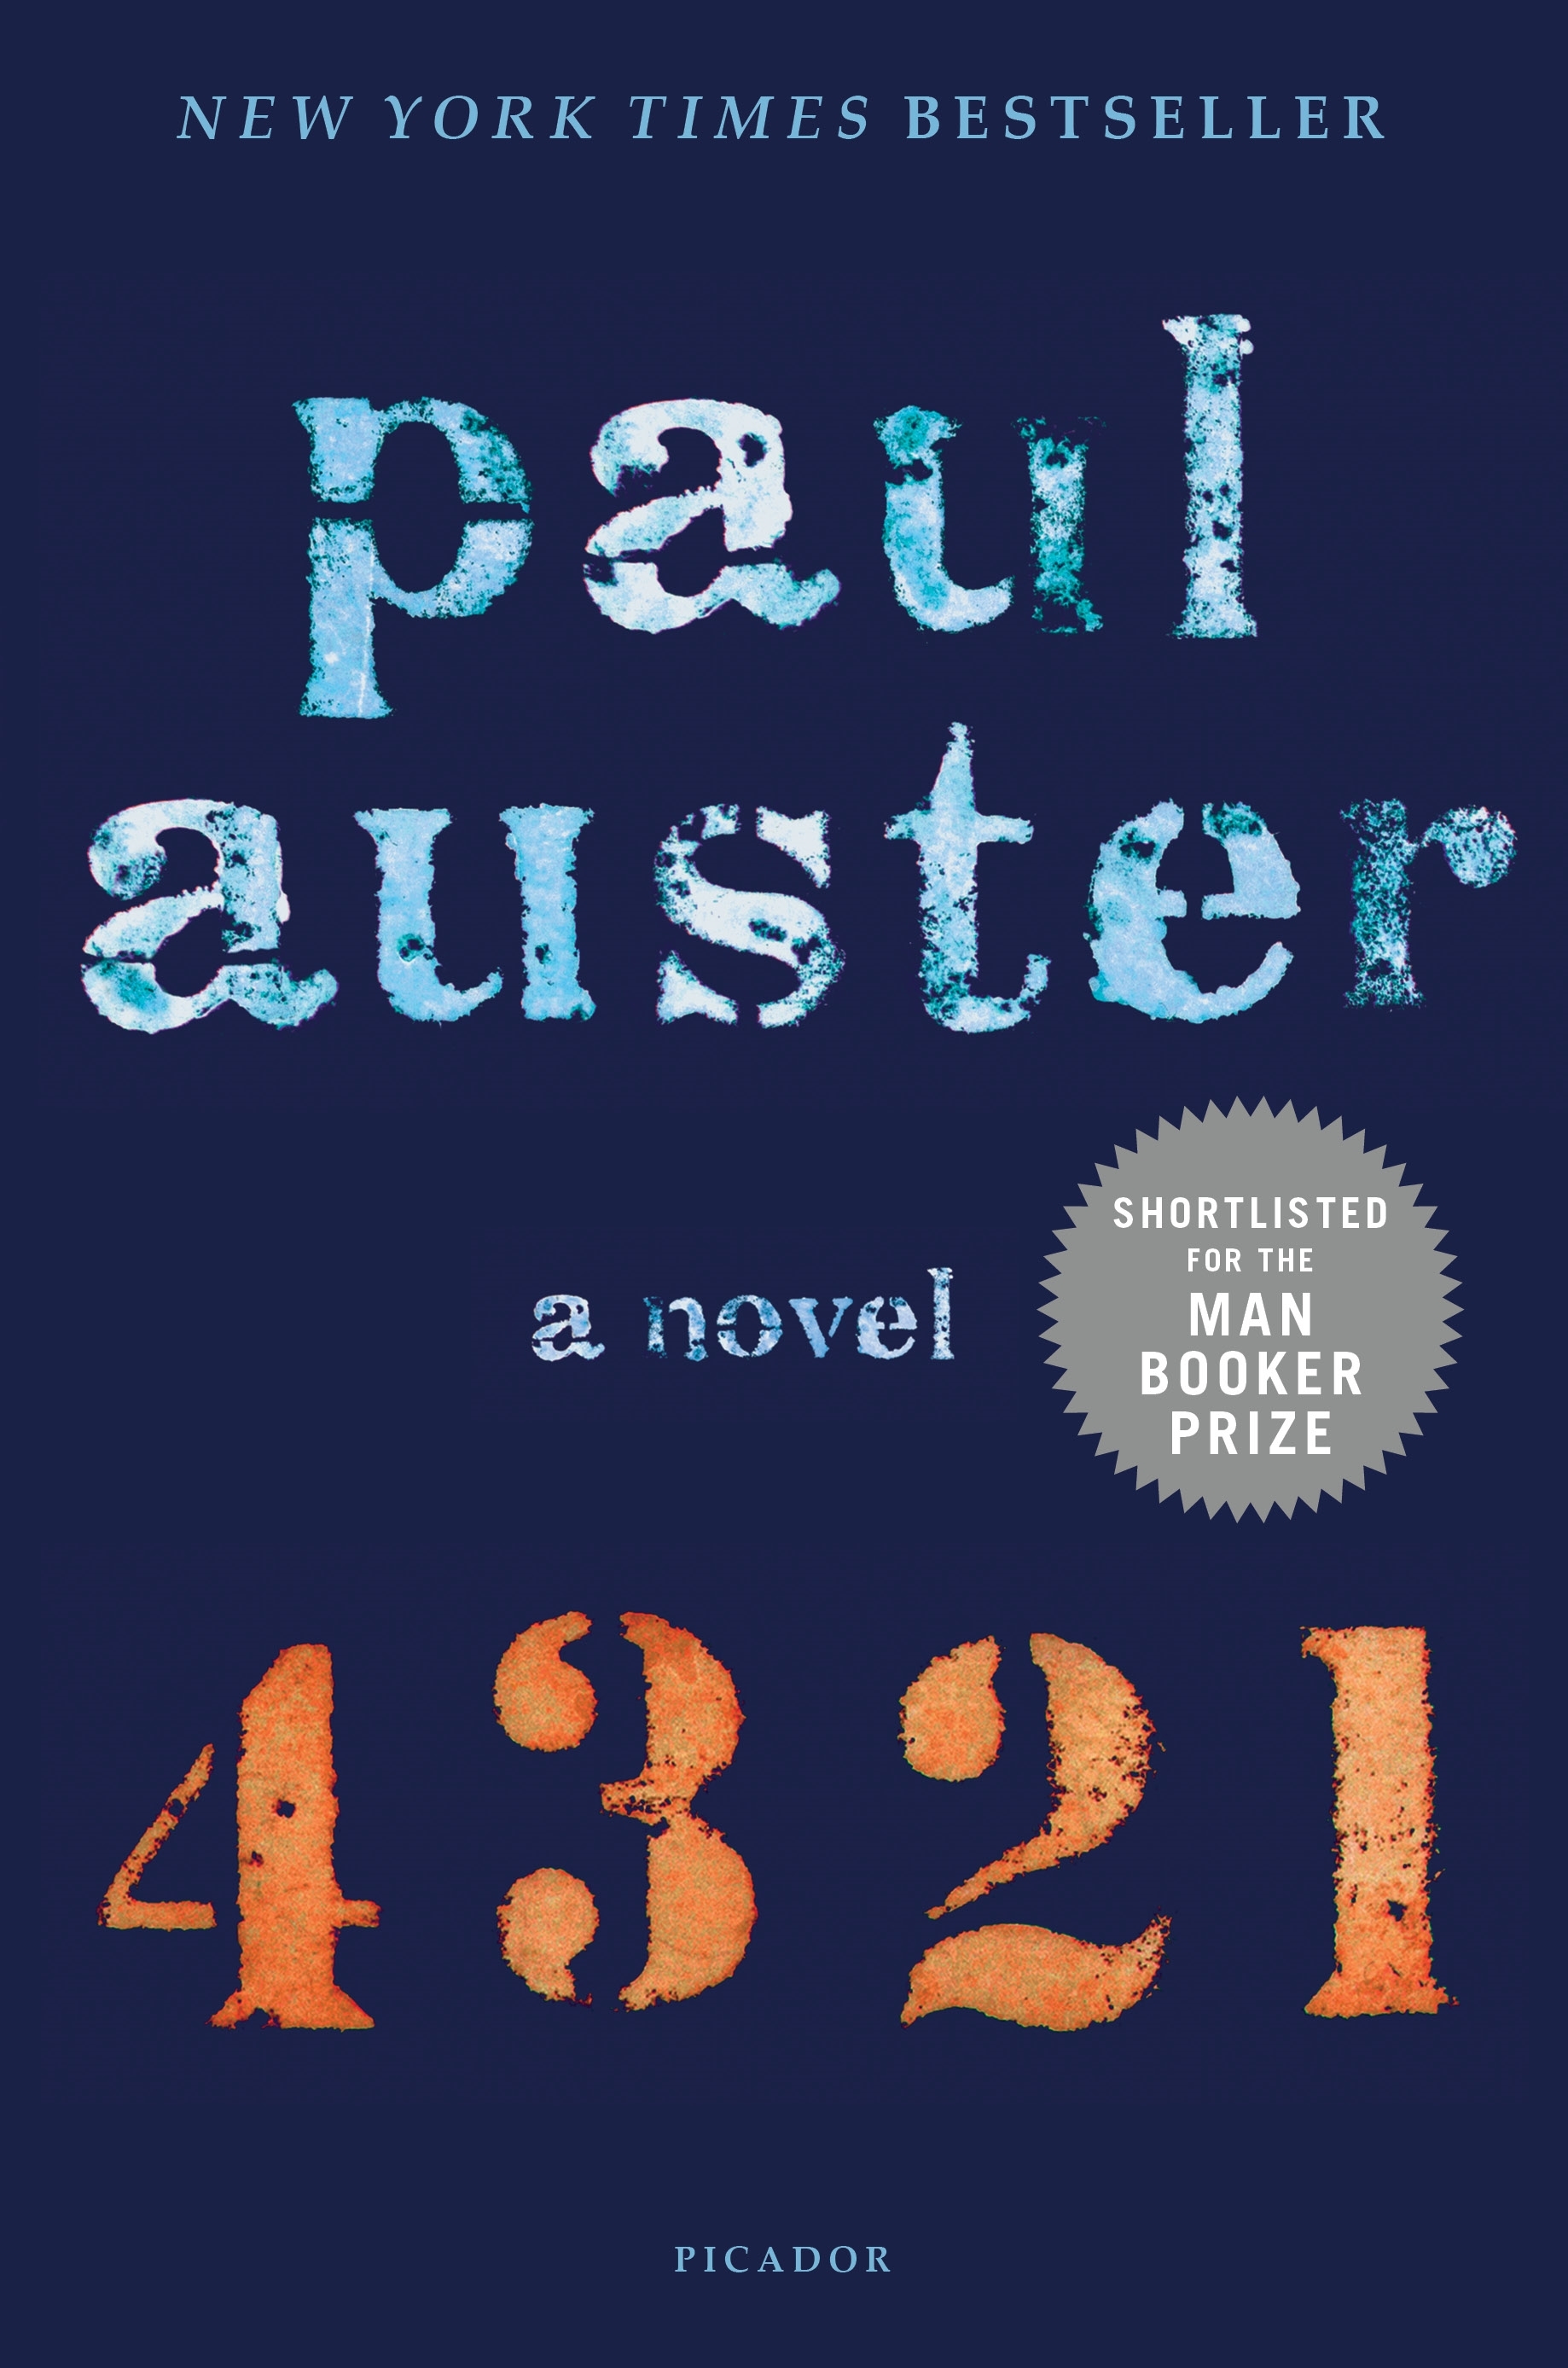 Book “4 3 2 1” by Paul Auster — May 5, 2020